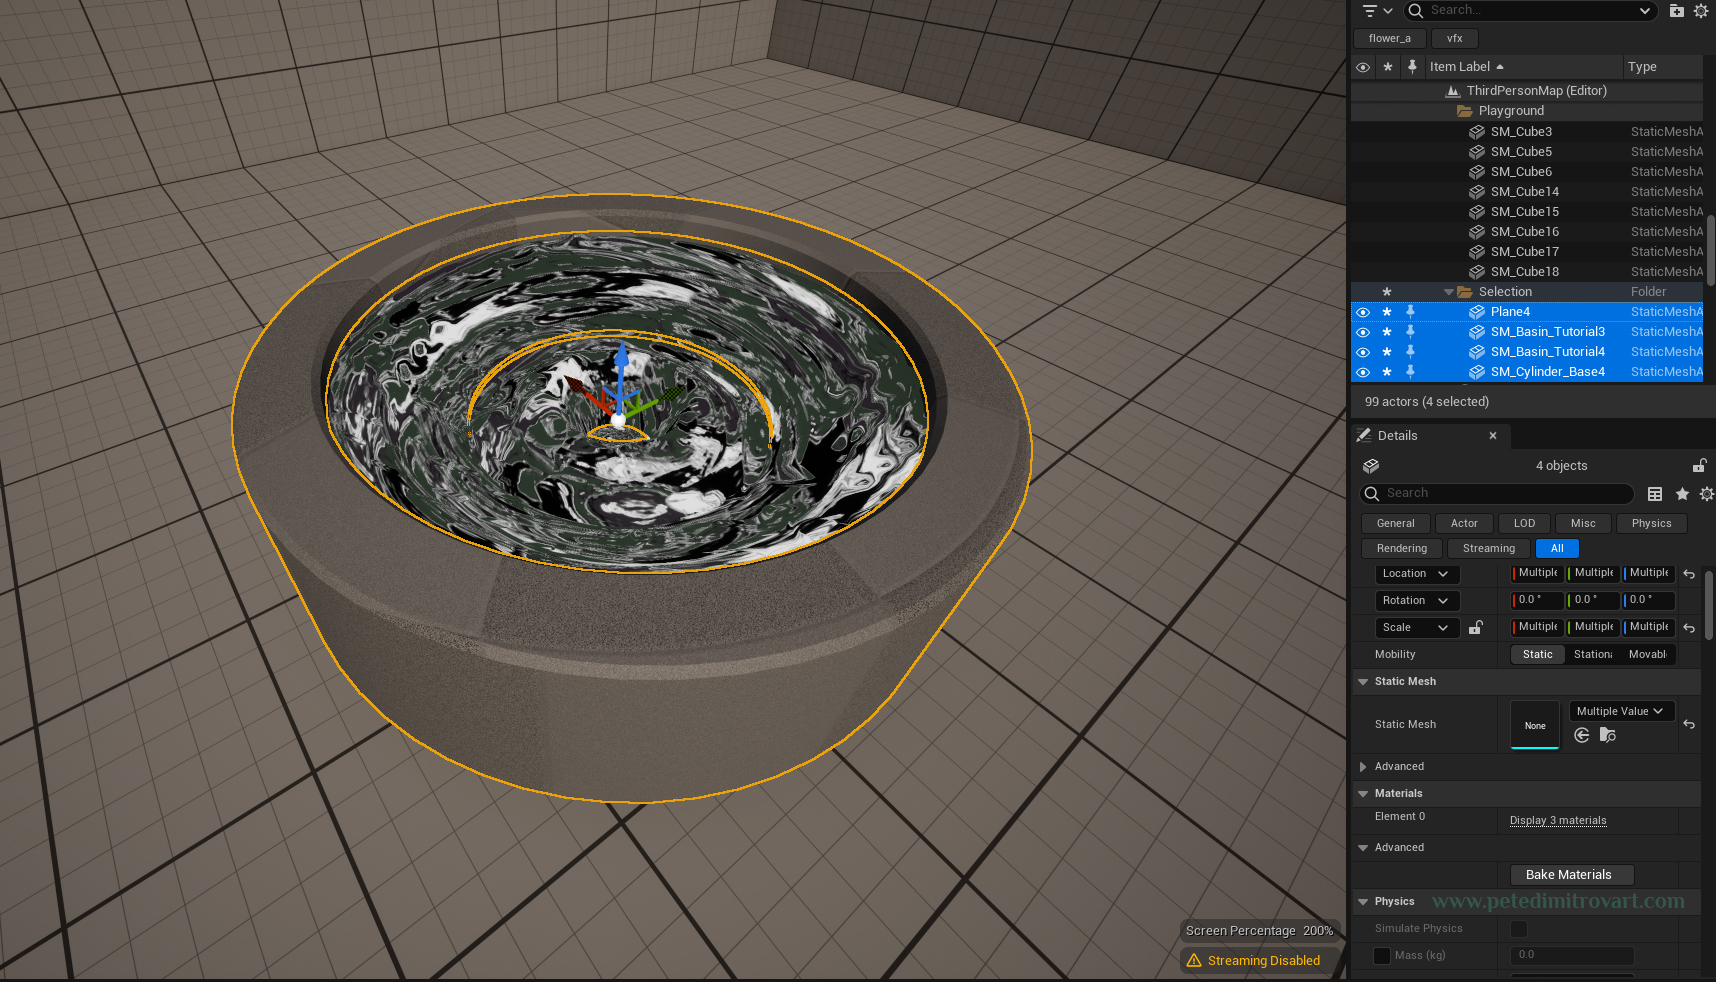 Unreal 5 screenshot of a scene. Four static meshes - plane, two vfx vortex basins and a cylinder are selected. That can be seen in the Hierarchy view on the right of the screen, where the pieces are selected in blue highlighter.